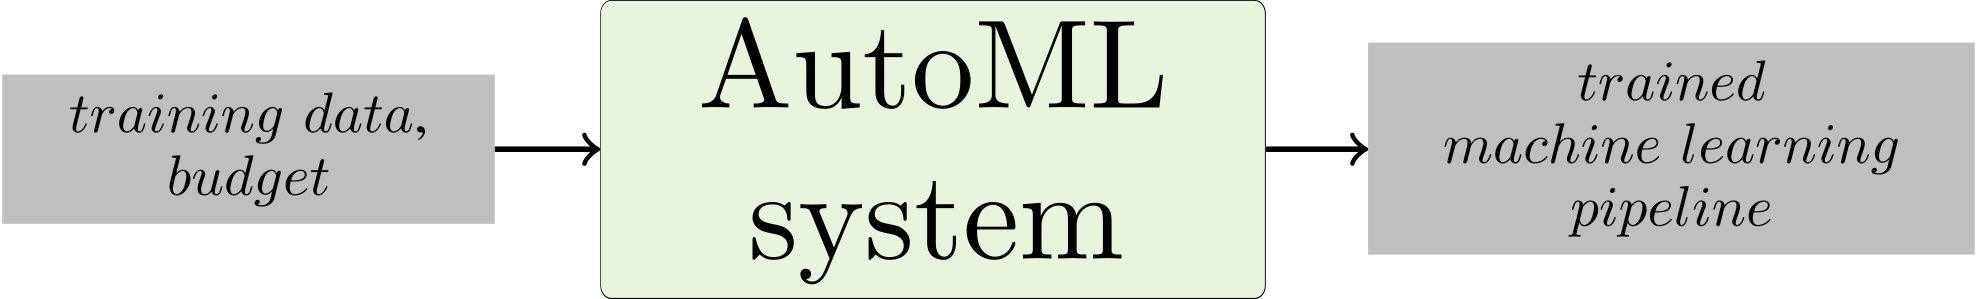 A brief depiction of an abstract AutoML system